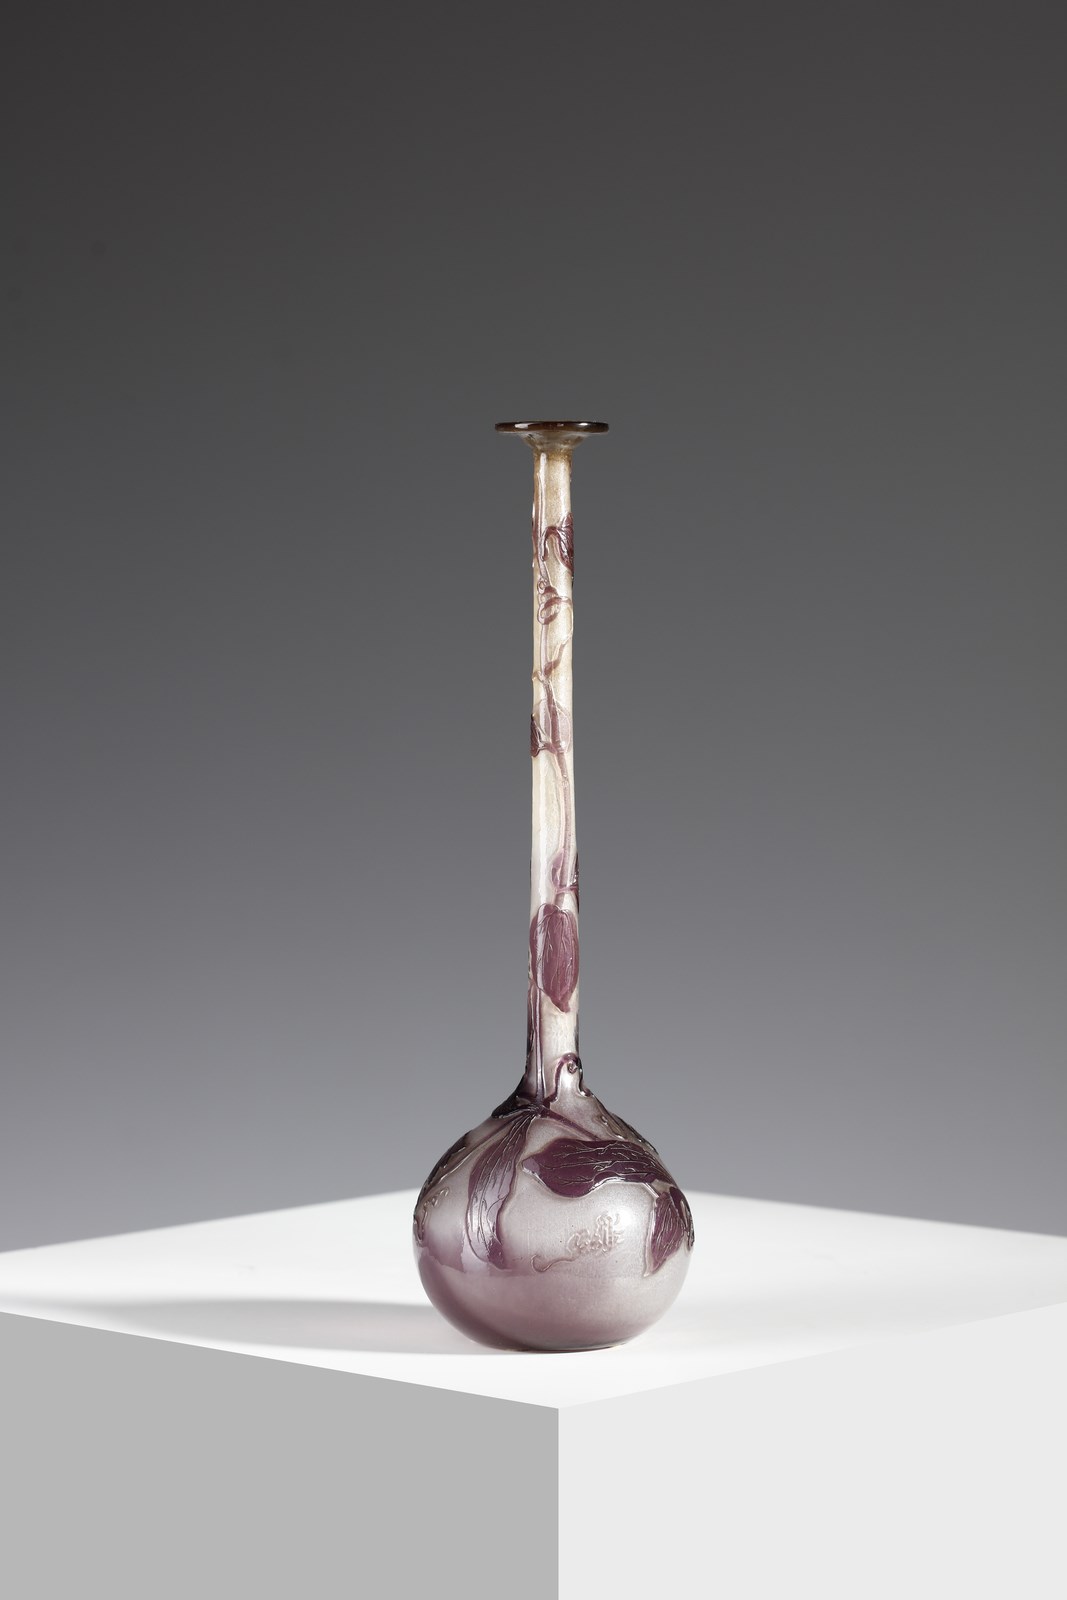 Soliflore bulb vase in double glass, with vegetable decoration in shades of violet, finely etched with acid on a pink background ( Gallé)